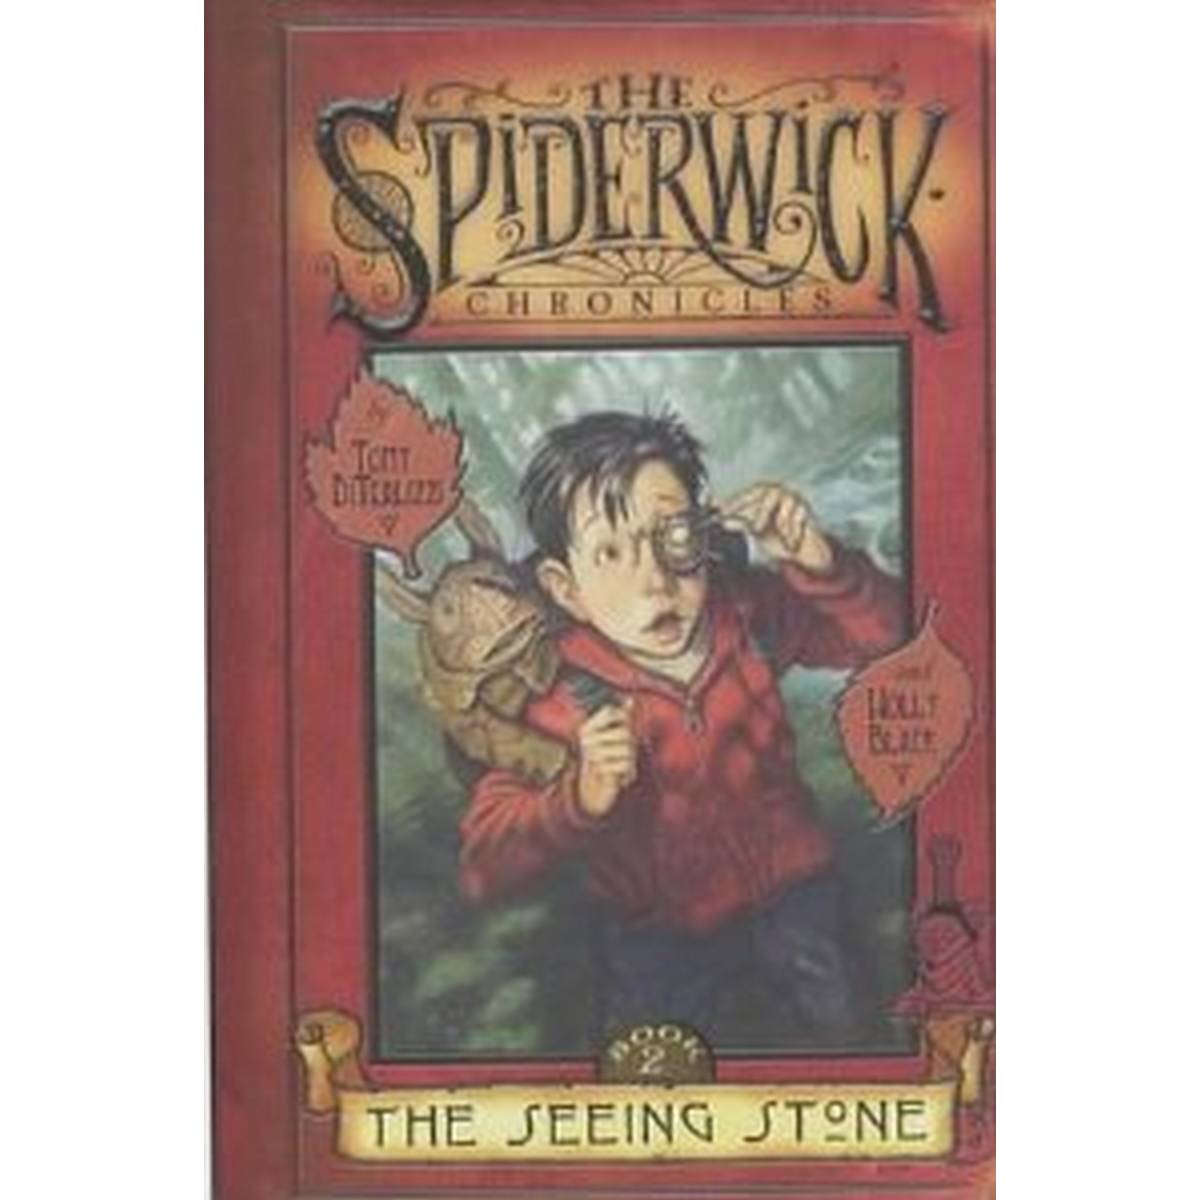 The Seeing Stone (Spiderwick Chronicles) 2